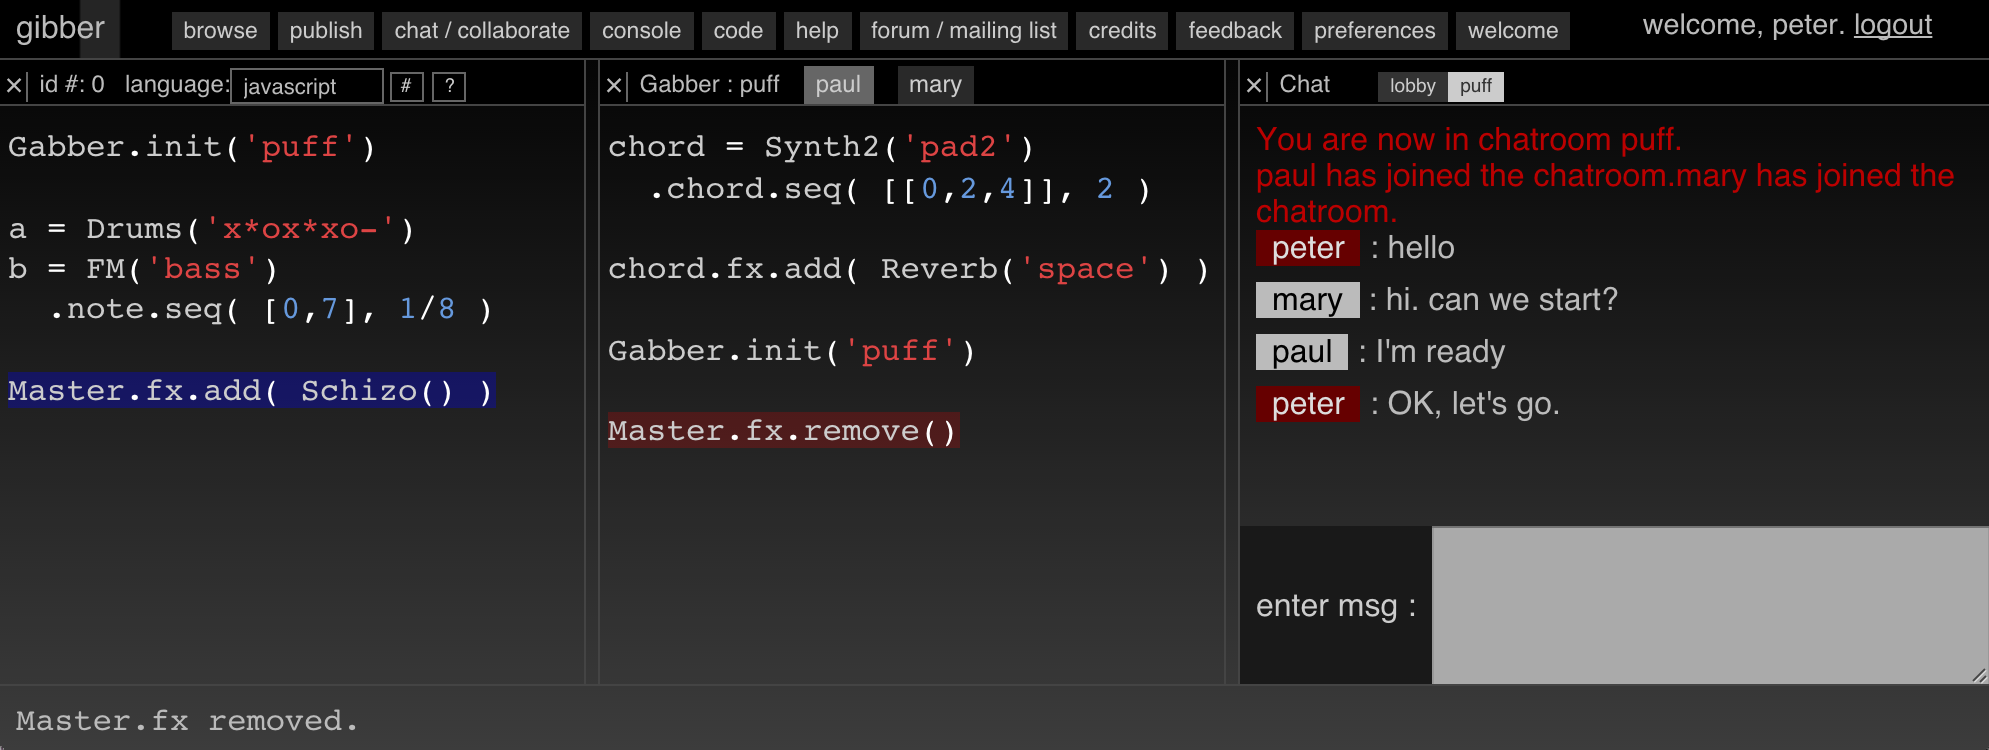 A screenshot of the Gabber interface in a networked performance with three performers: Peter, Paul and Mary. The screenshot shows what Paul is seeing. Note the two highlighted code fragments; the blue highlight indicates code that the performer (Peter) has sent over the network to be executed. The red highlight indicates code that another member (Paul) of the ensemble has remotely executed on Peter's machine.